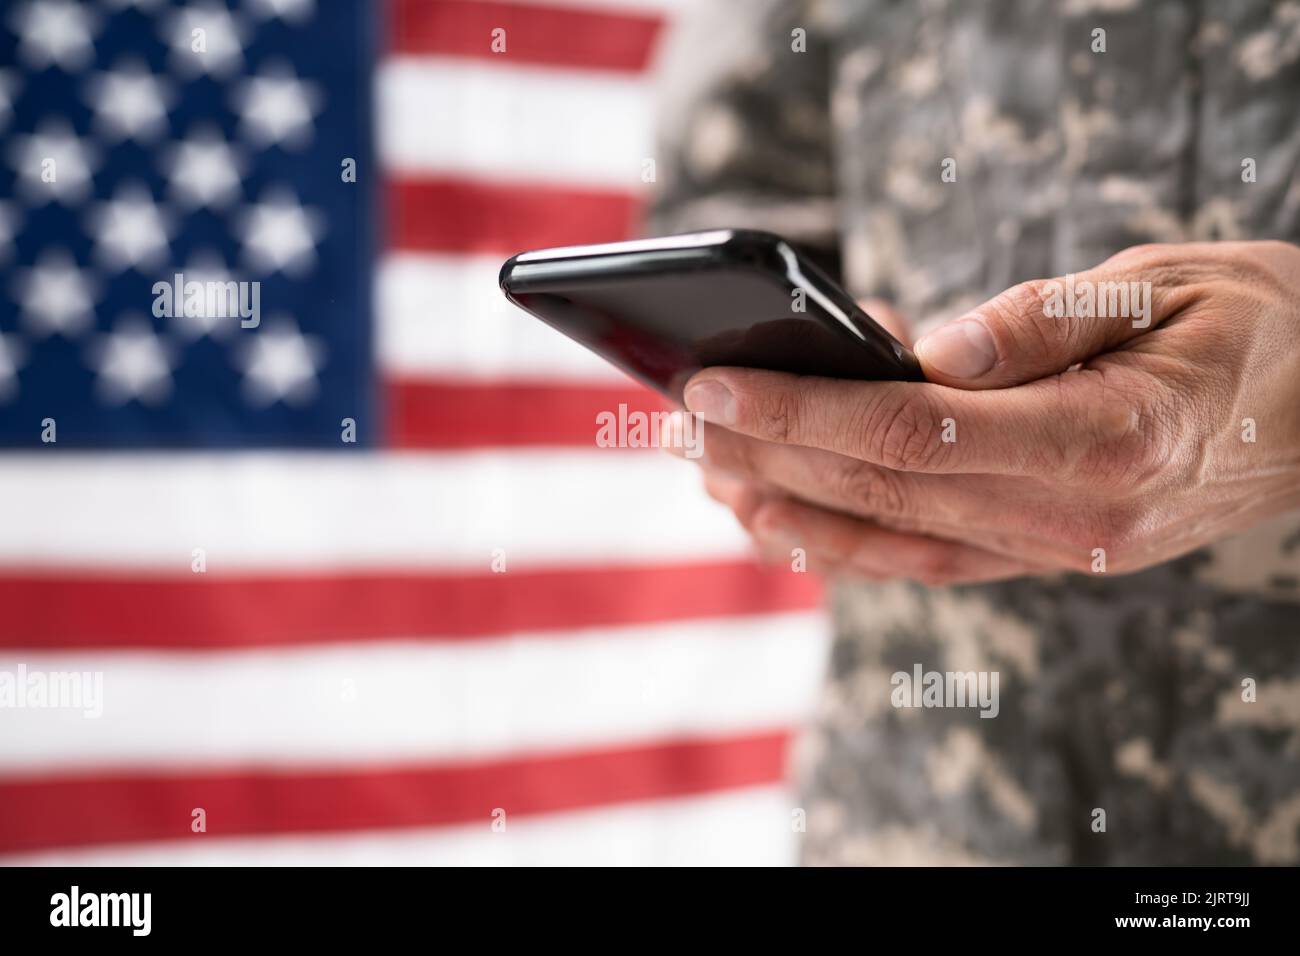 Soldier Holding Mobile Phone. Military War Espionage Stock Photo